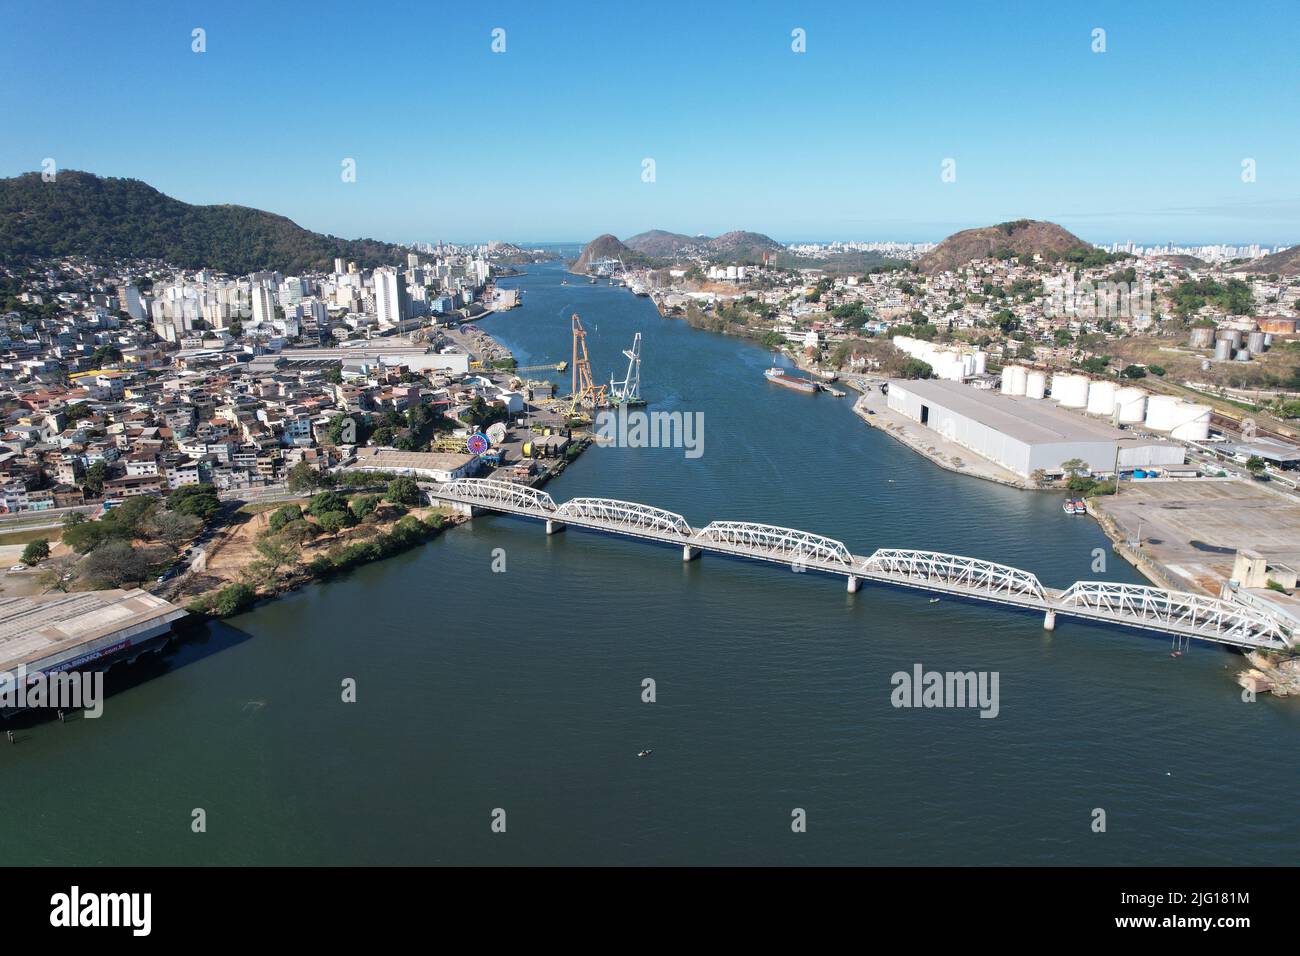 View of the bay of the city of Vitória - Brazil Stock Photo